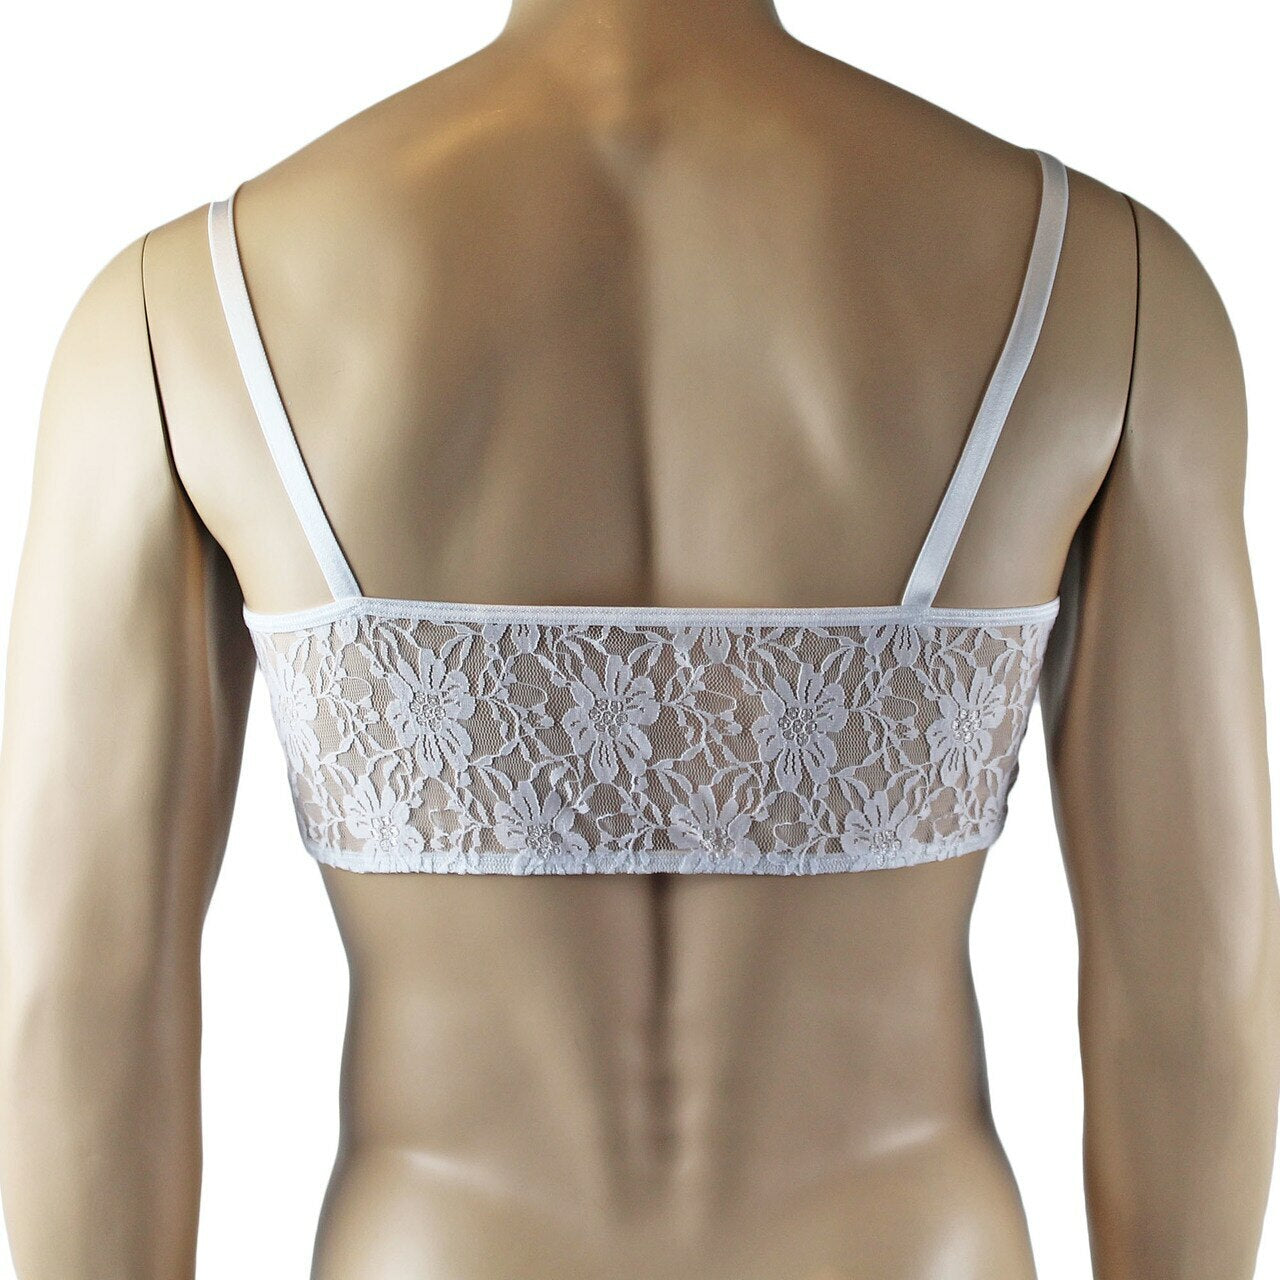 Mens Sexy Lace Crop Bra Top Camisole and Male Lingerie Panty Briefs White